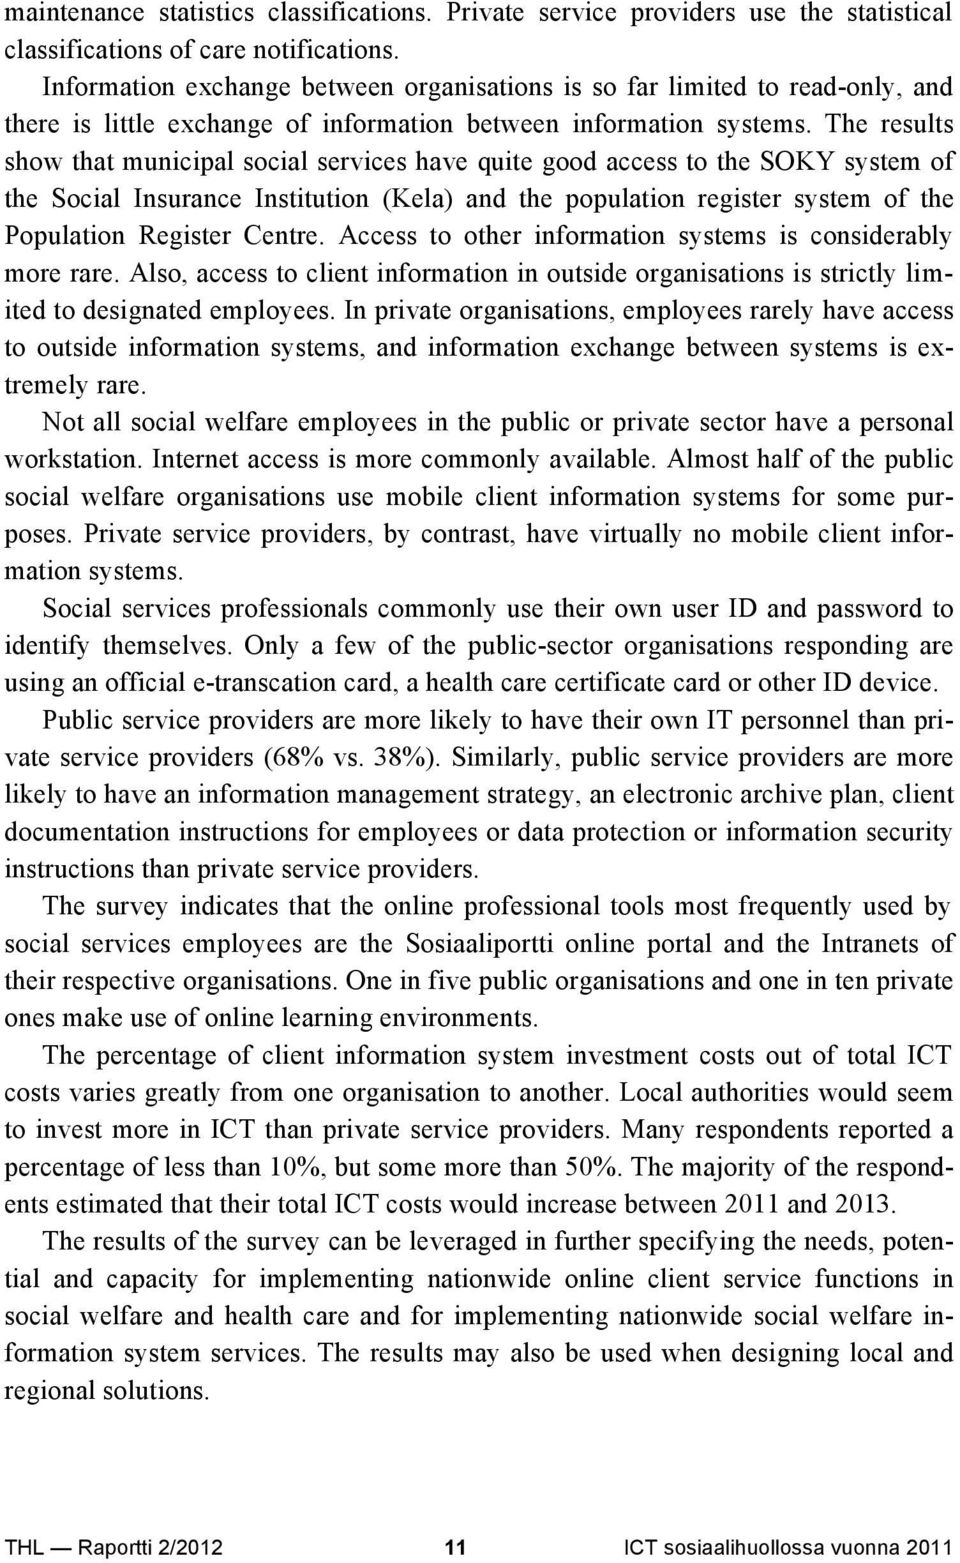 The results show that municipal social services have quite good access to the SOKY system of the Social Insurance Institution (Kela) and the population register system of the Population Register